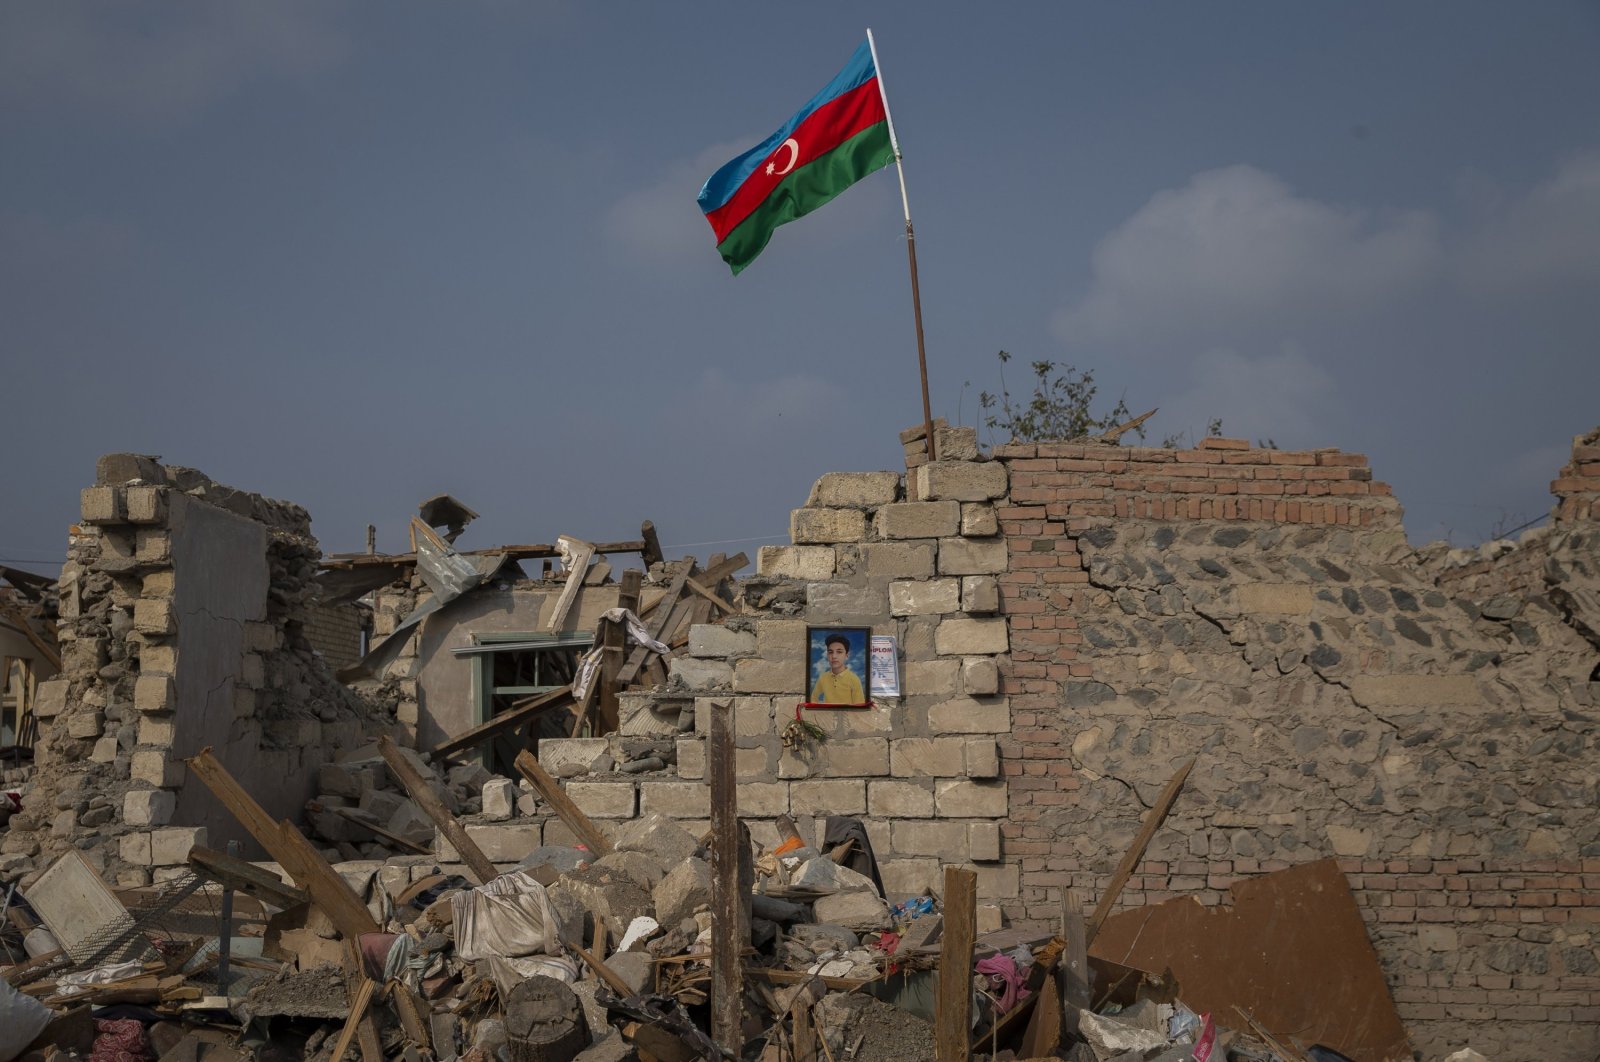 A picture of a boy killed in Armenian attacks hangs on the wall of a damaged building as an Azerbaijani flag waves on the rubble above, in Ganja, Azerbaijan, Nov. 5, 2020. (AA Photo)